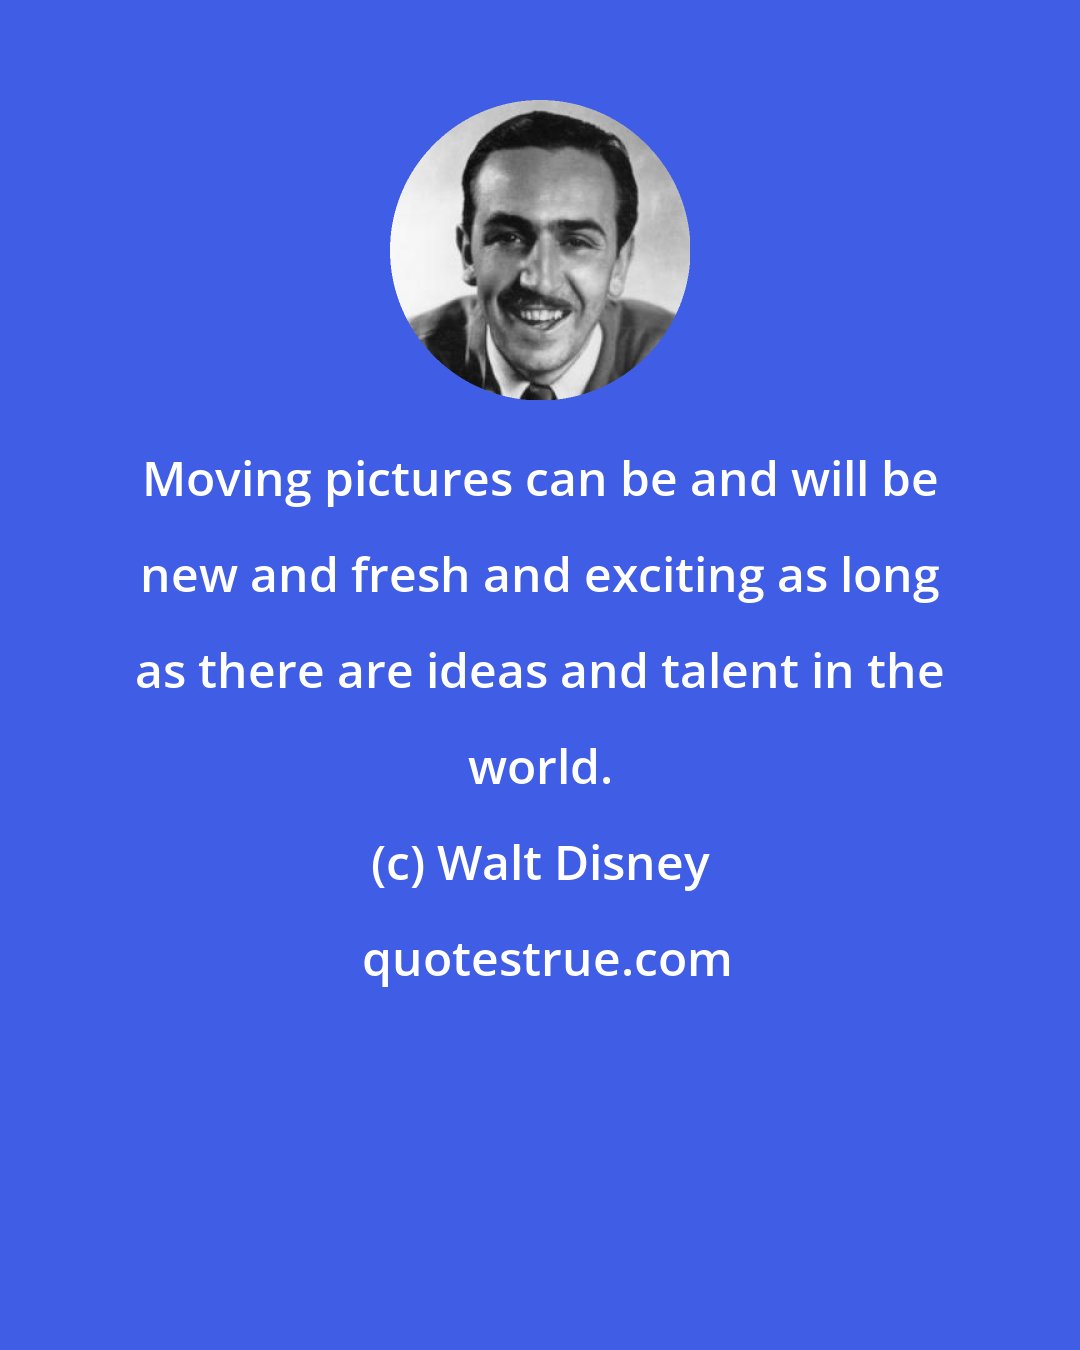 Walt Disney: Moving pictures can be and will be new and fresh and exciting as long as there are ideas and talent in the world.